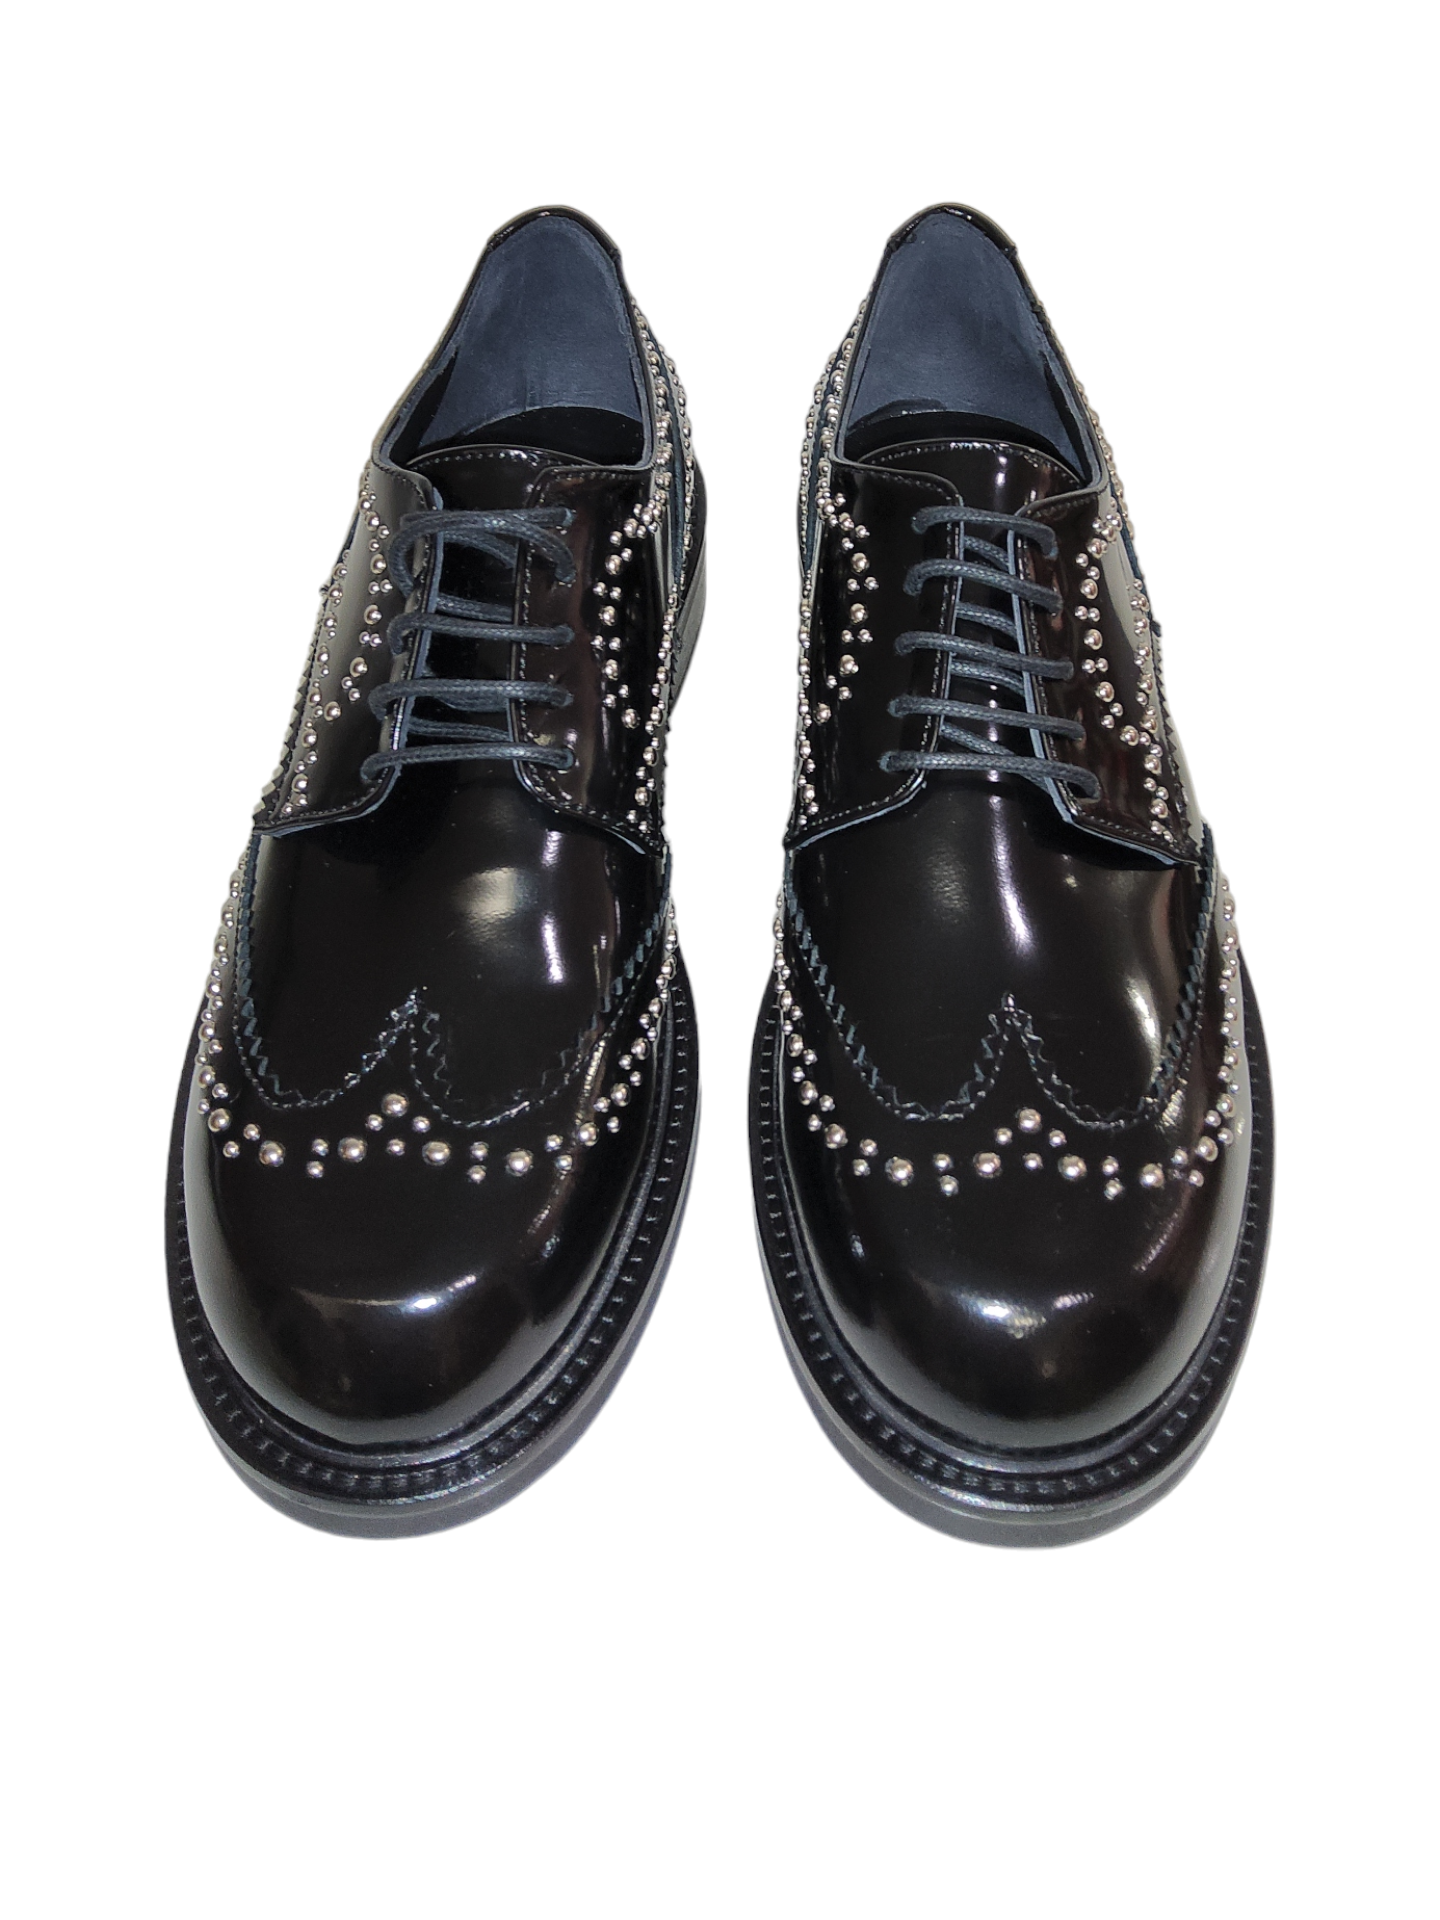 Black leather brogues